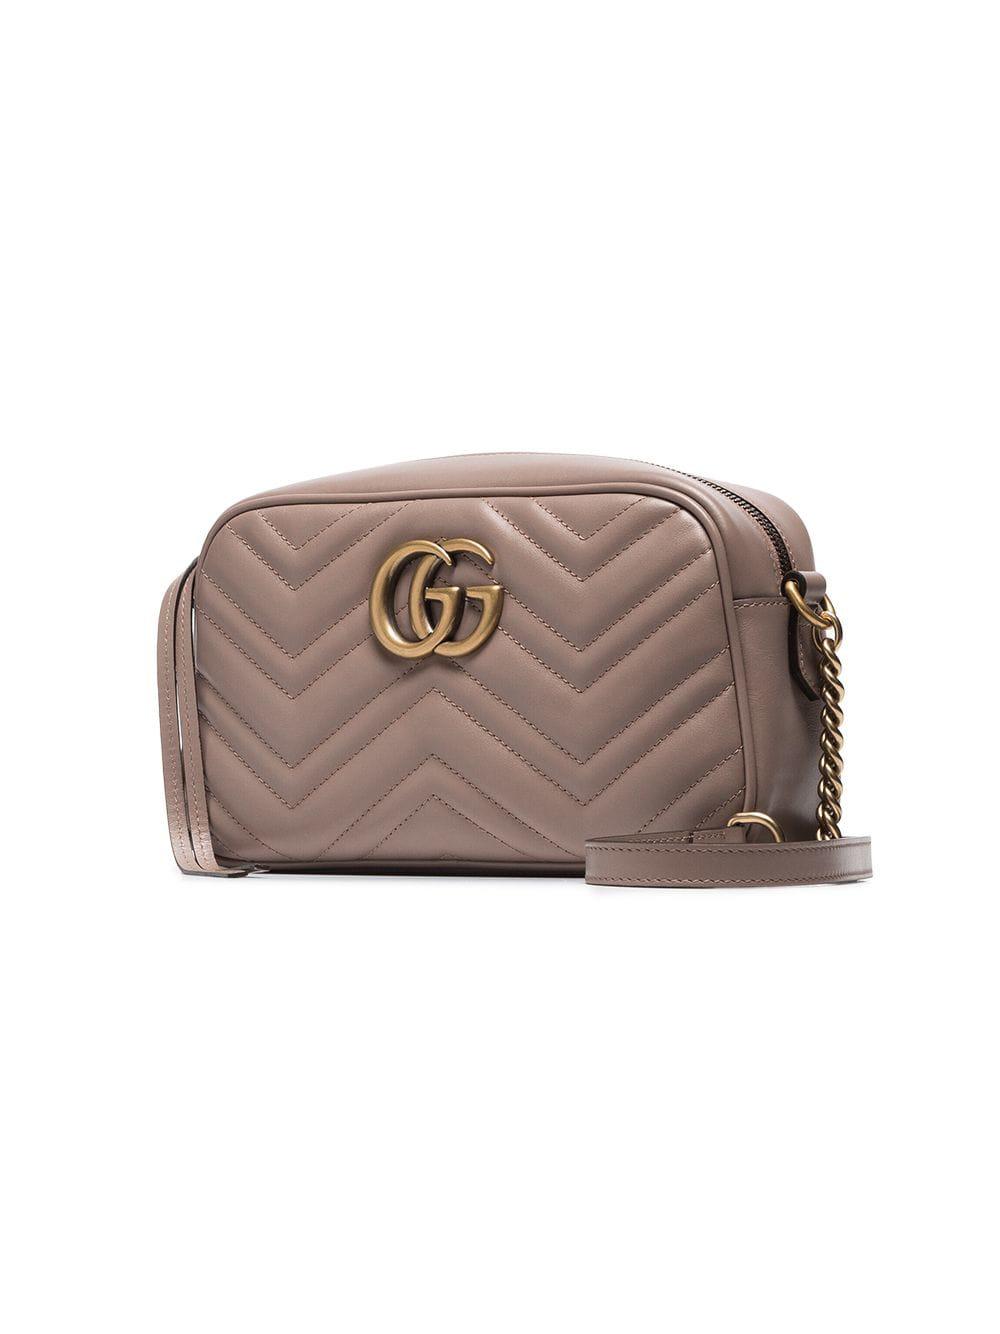 Gucci Nude GG Marmont Quilted Leather Shoulder Bag | Lyst